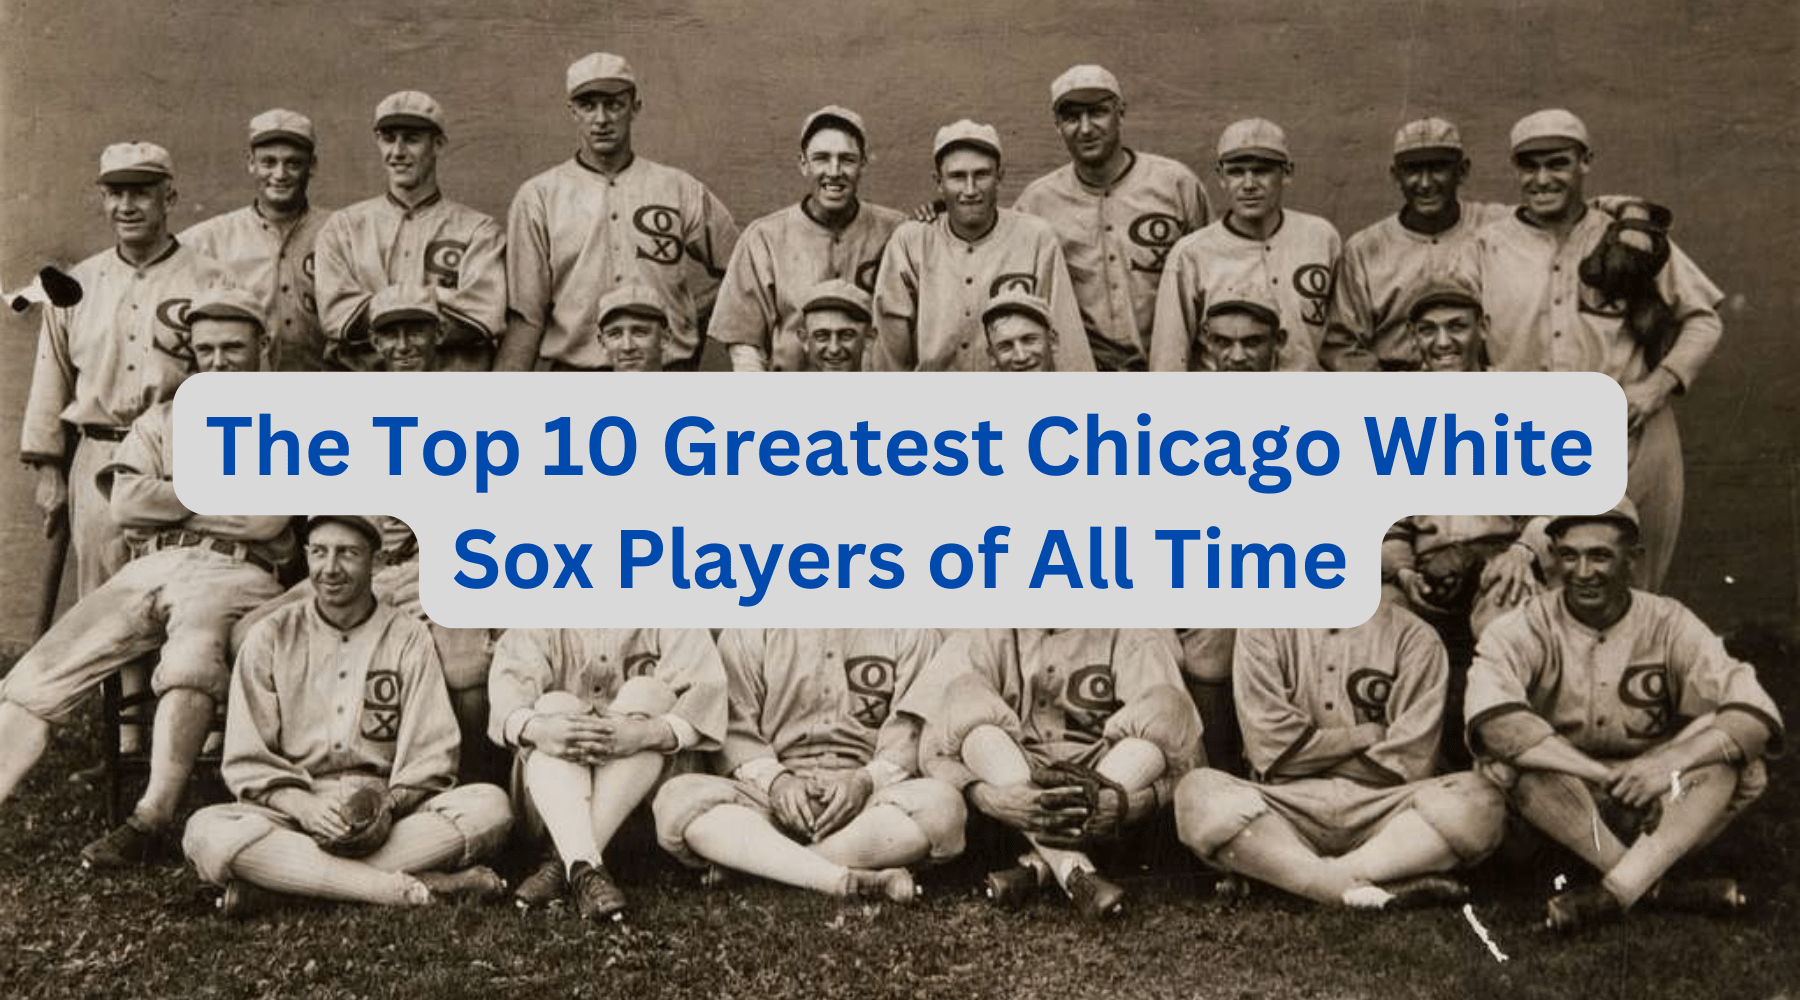 The Top 10 Greatest Chicago White Sox Players of All Time